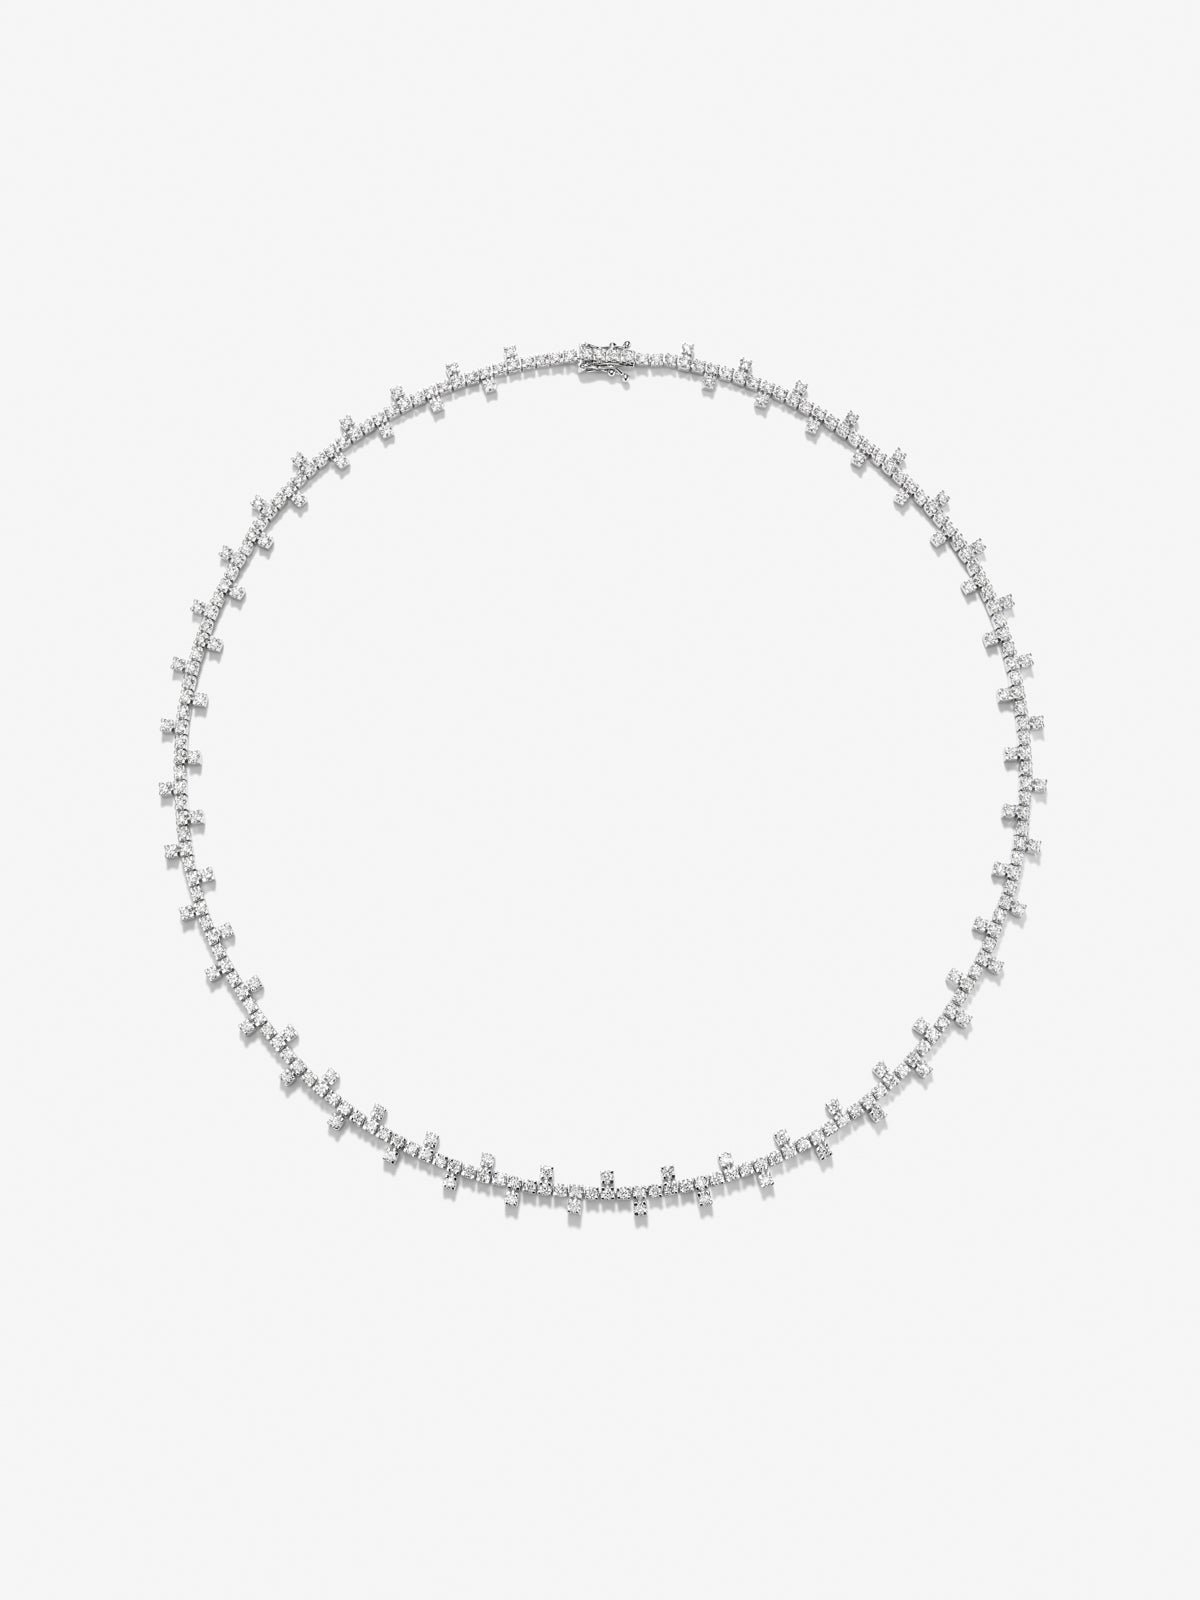 18K white gold necklace with 259 brilliant-cut diamonds with a total of 5.4 cts